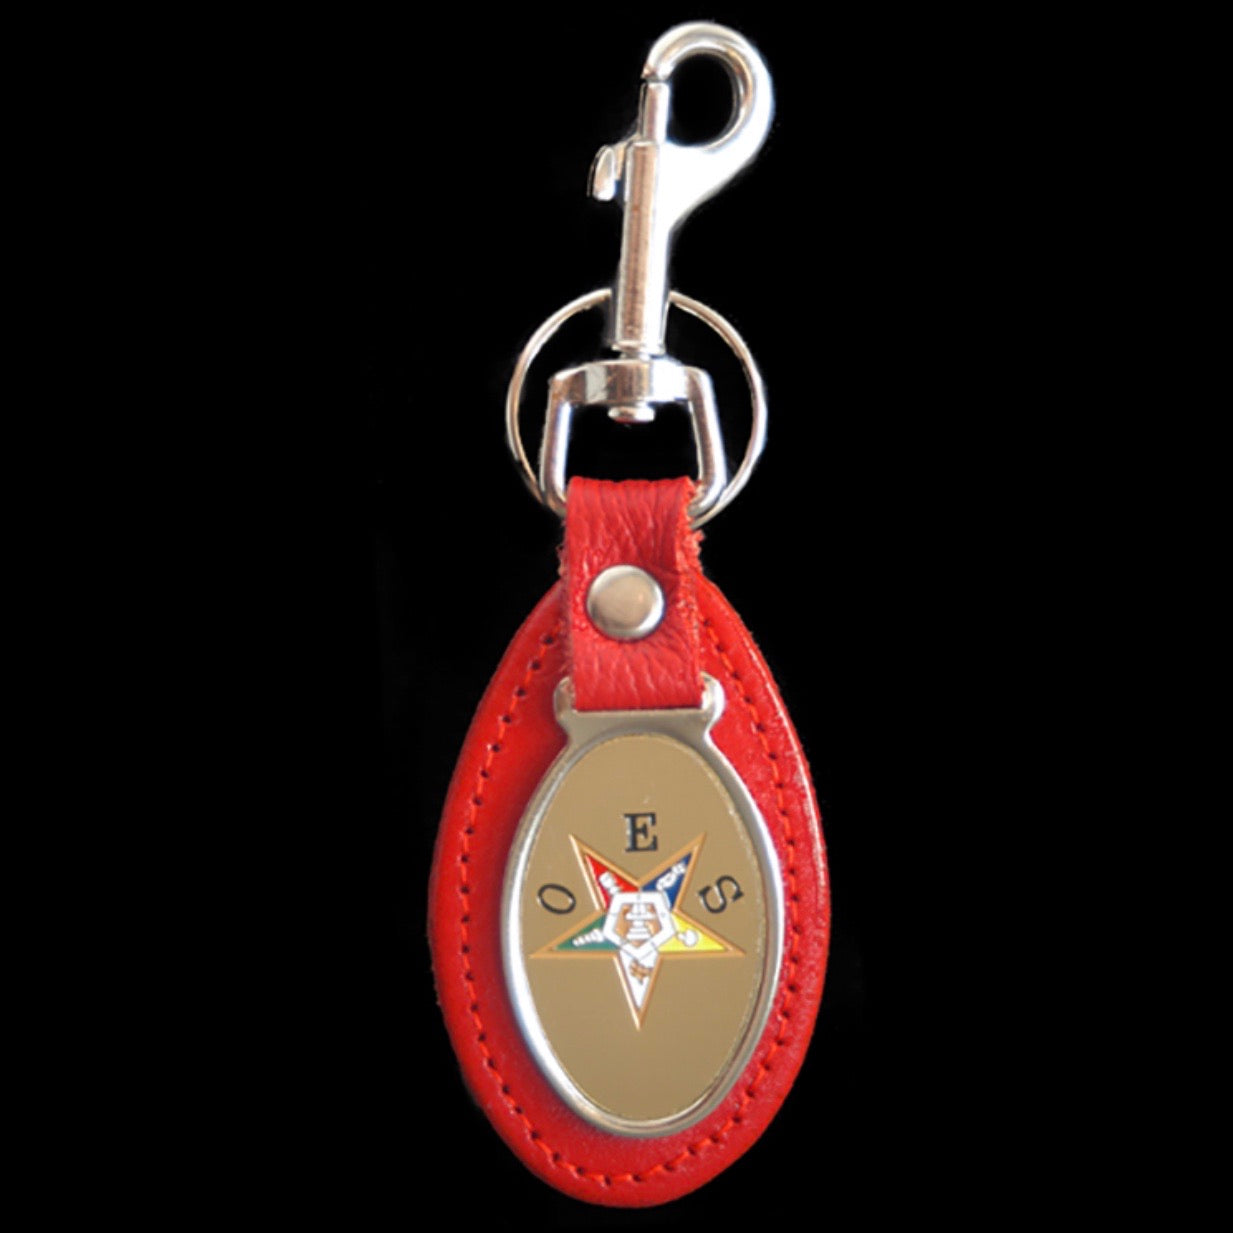 OES Leather Fob Key Chain